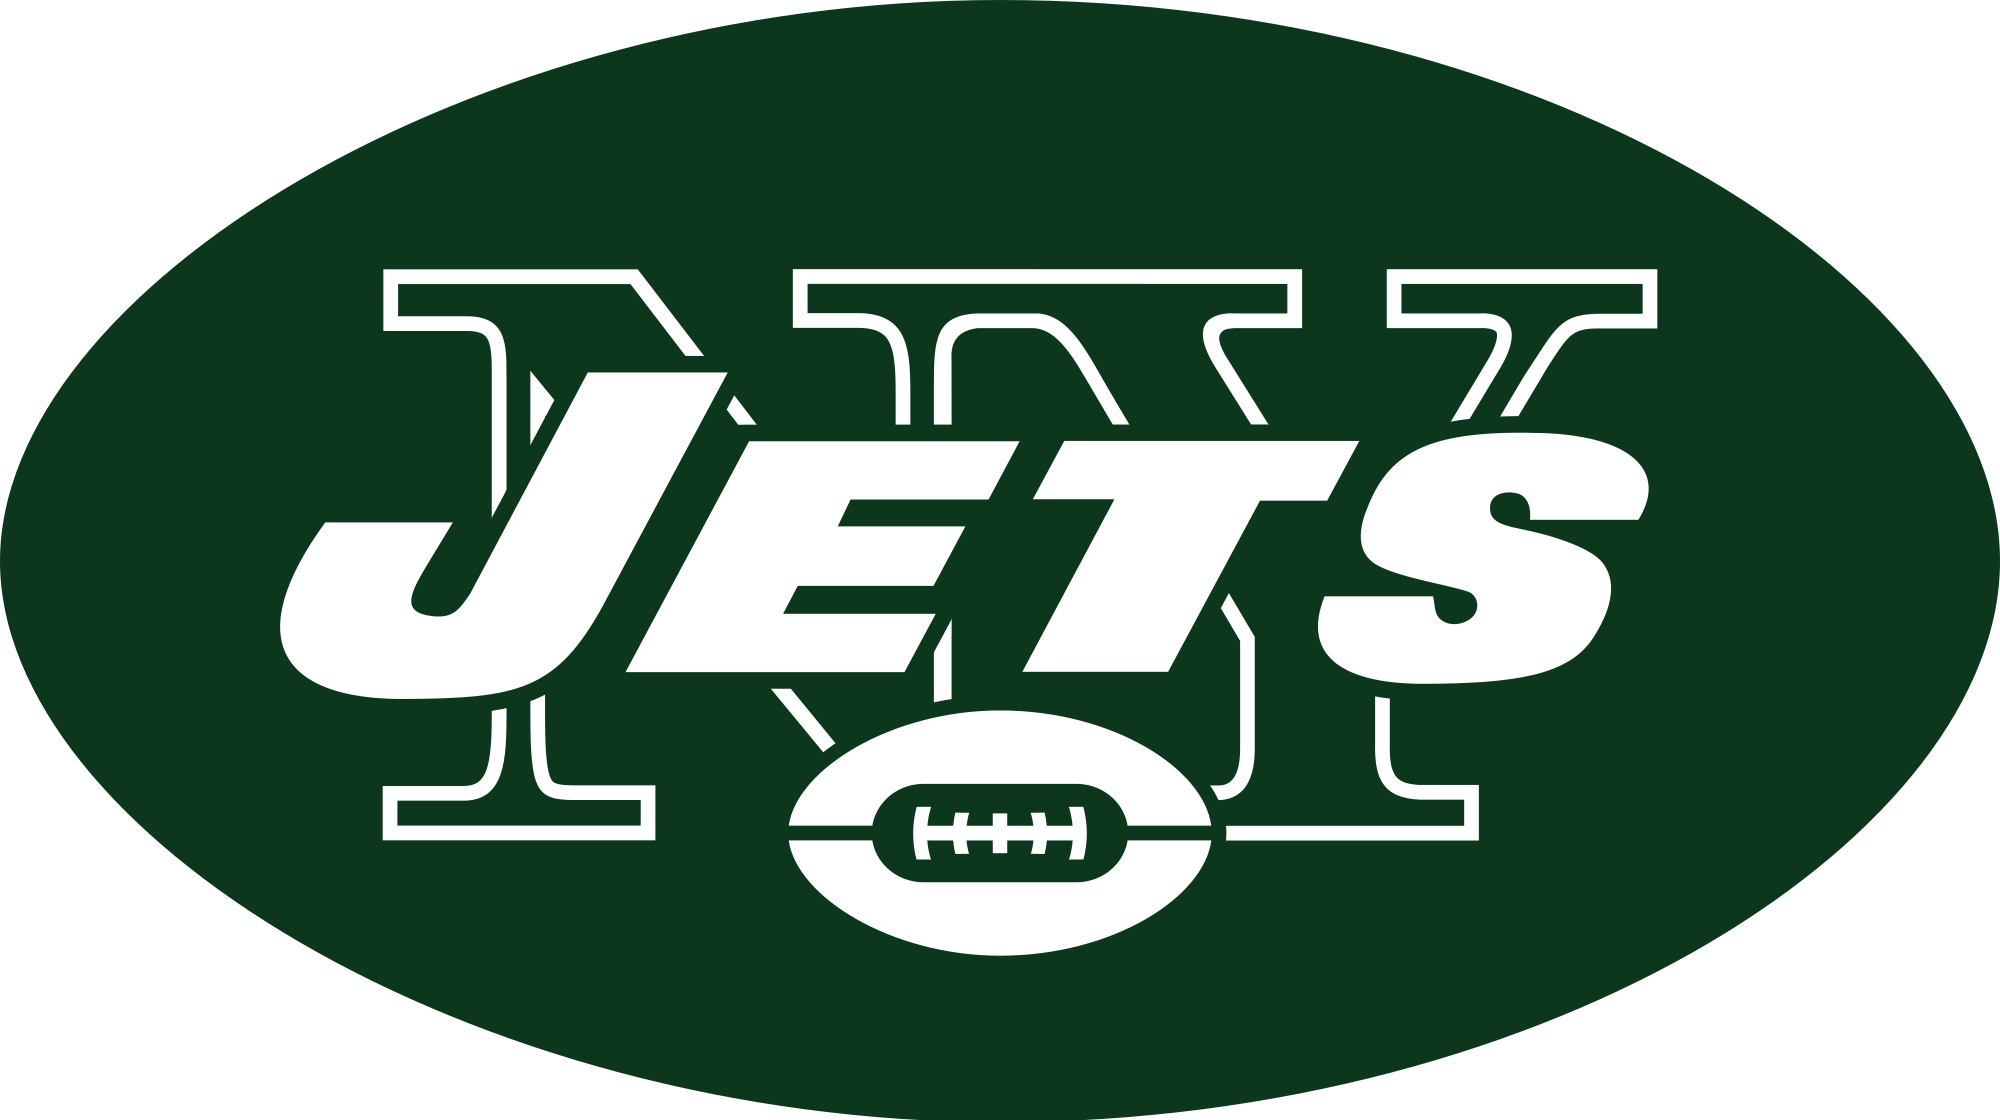 The New York Jets Are Team Of Fictional Character Flash Gordon